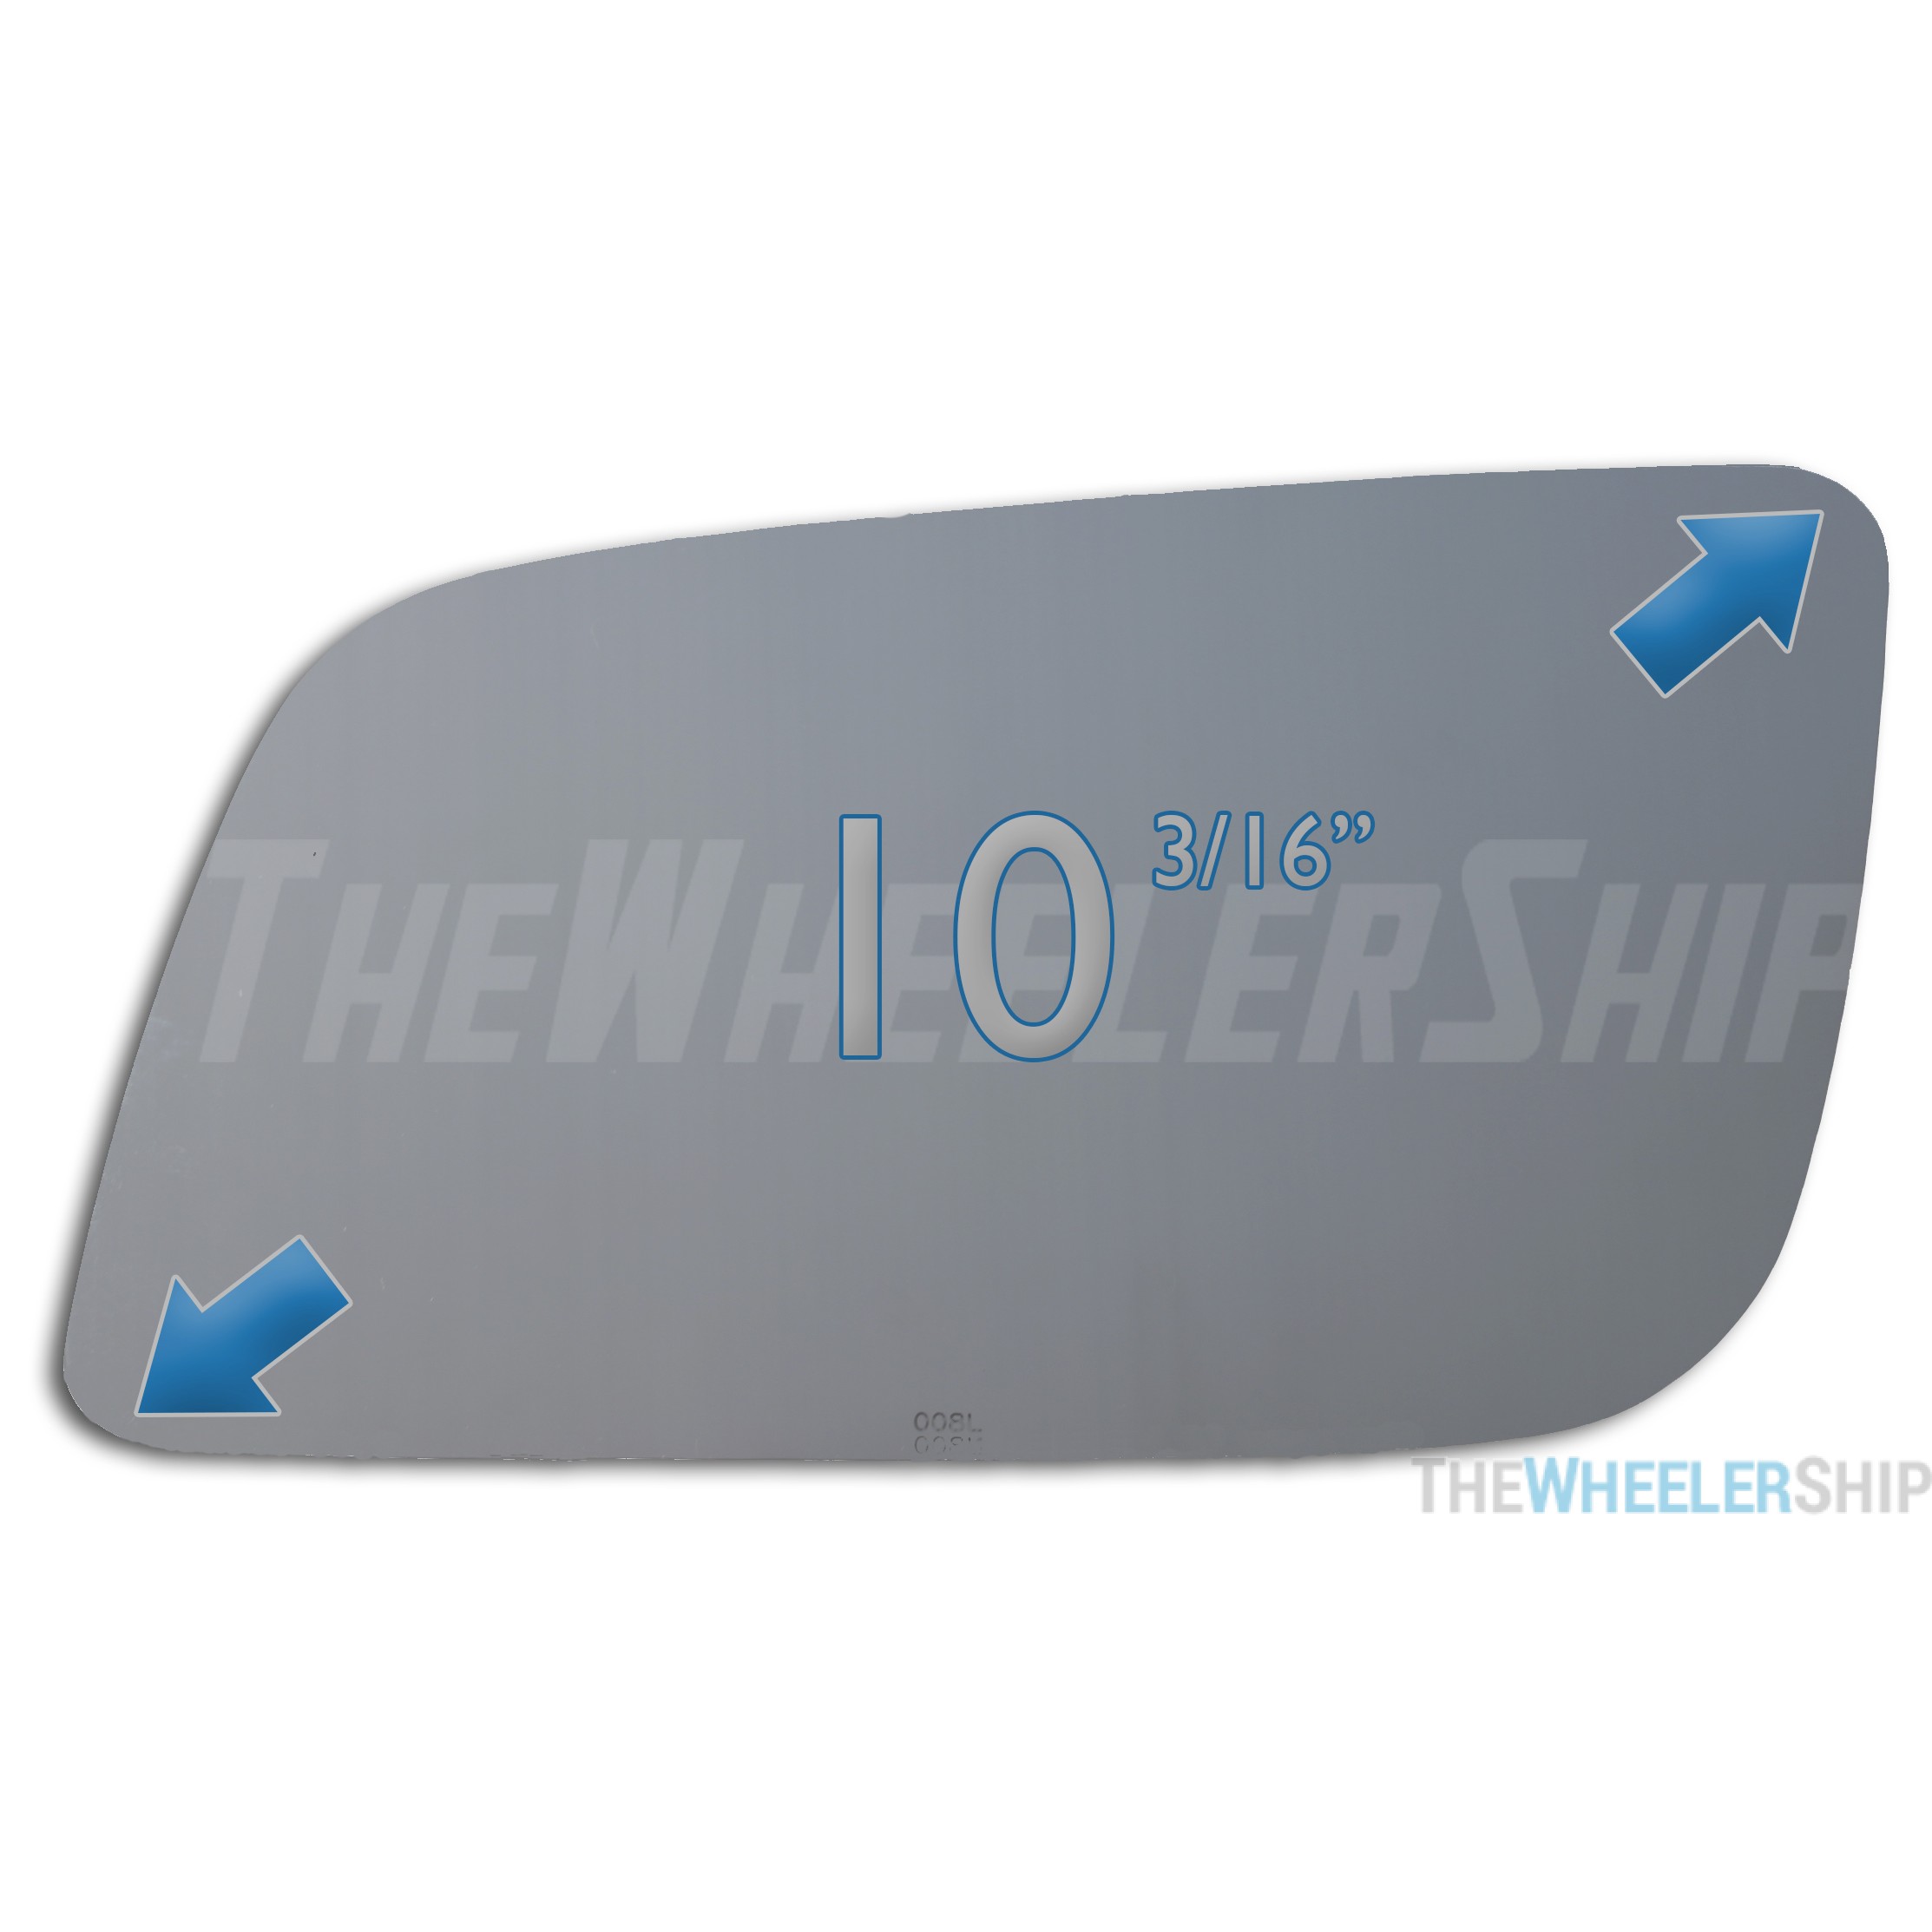 ADHESIVE CHEVY GMC TRUCK VAN Driver Left Side ** FAST SHIP ** New Mirror Glass